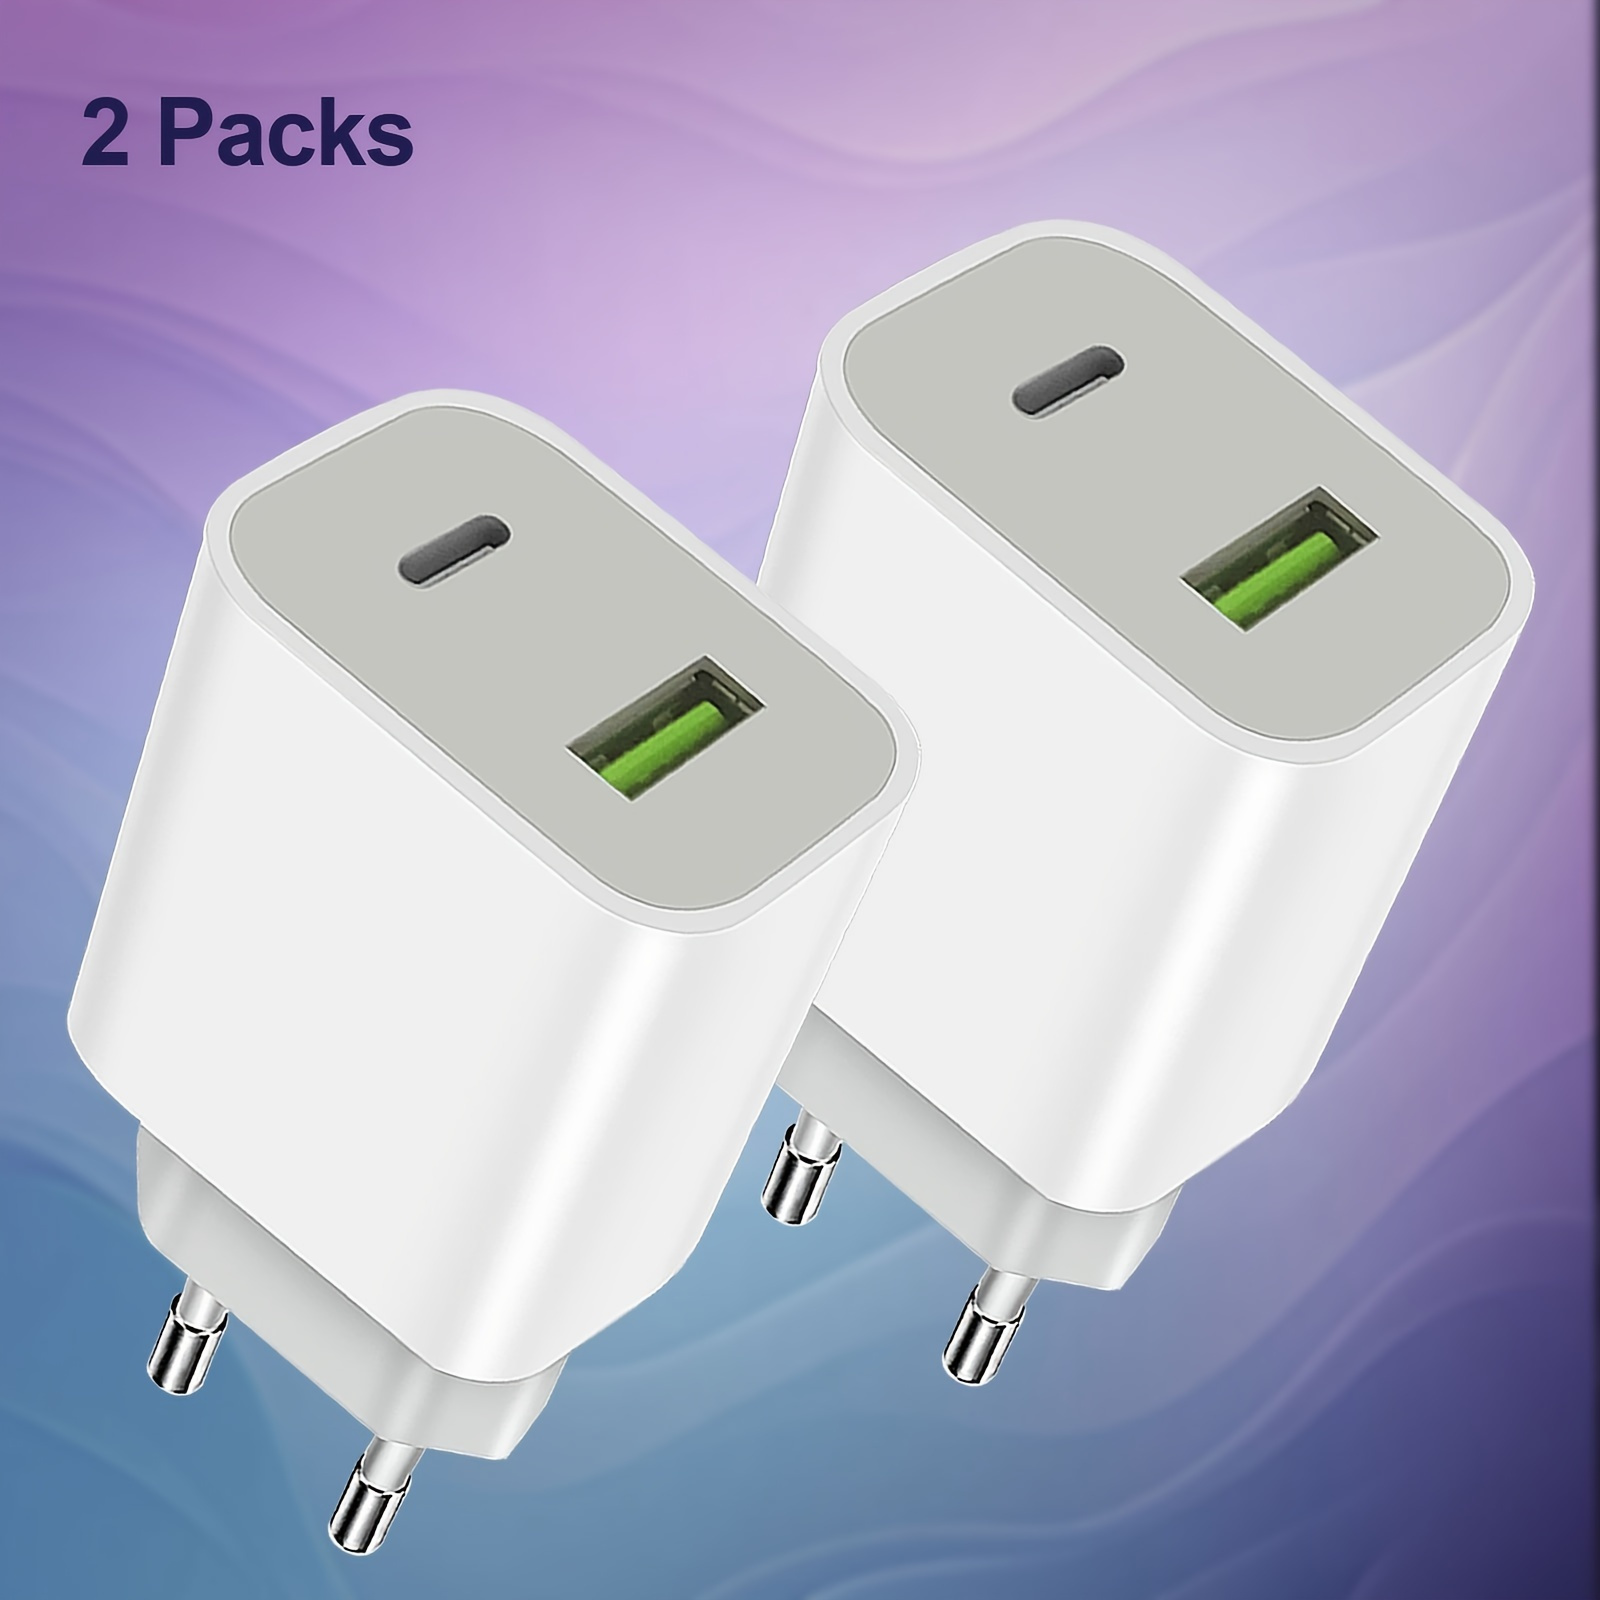 

2pcs Usb C Charger Block Power Adapter Wall Charger, Double Fast Plug Charging Brick Suitable For Iphone 14/14 Pro/13/12/11/xs, Samsung Galaxy - Color: White